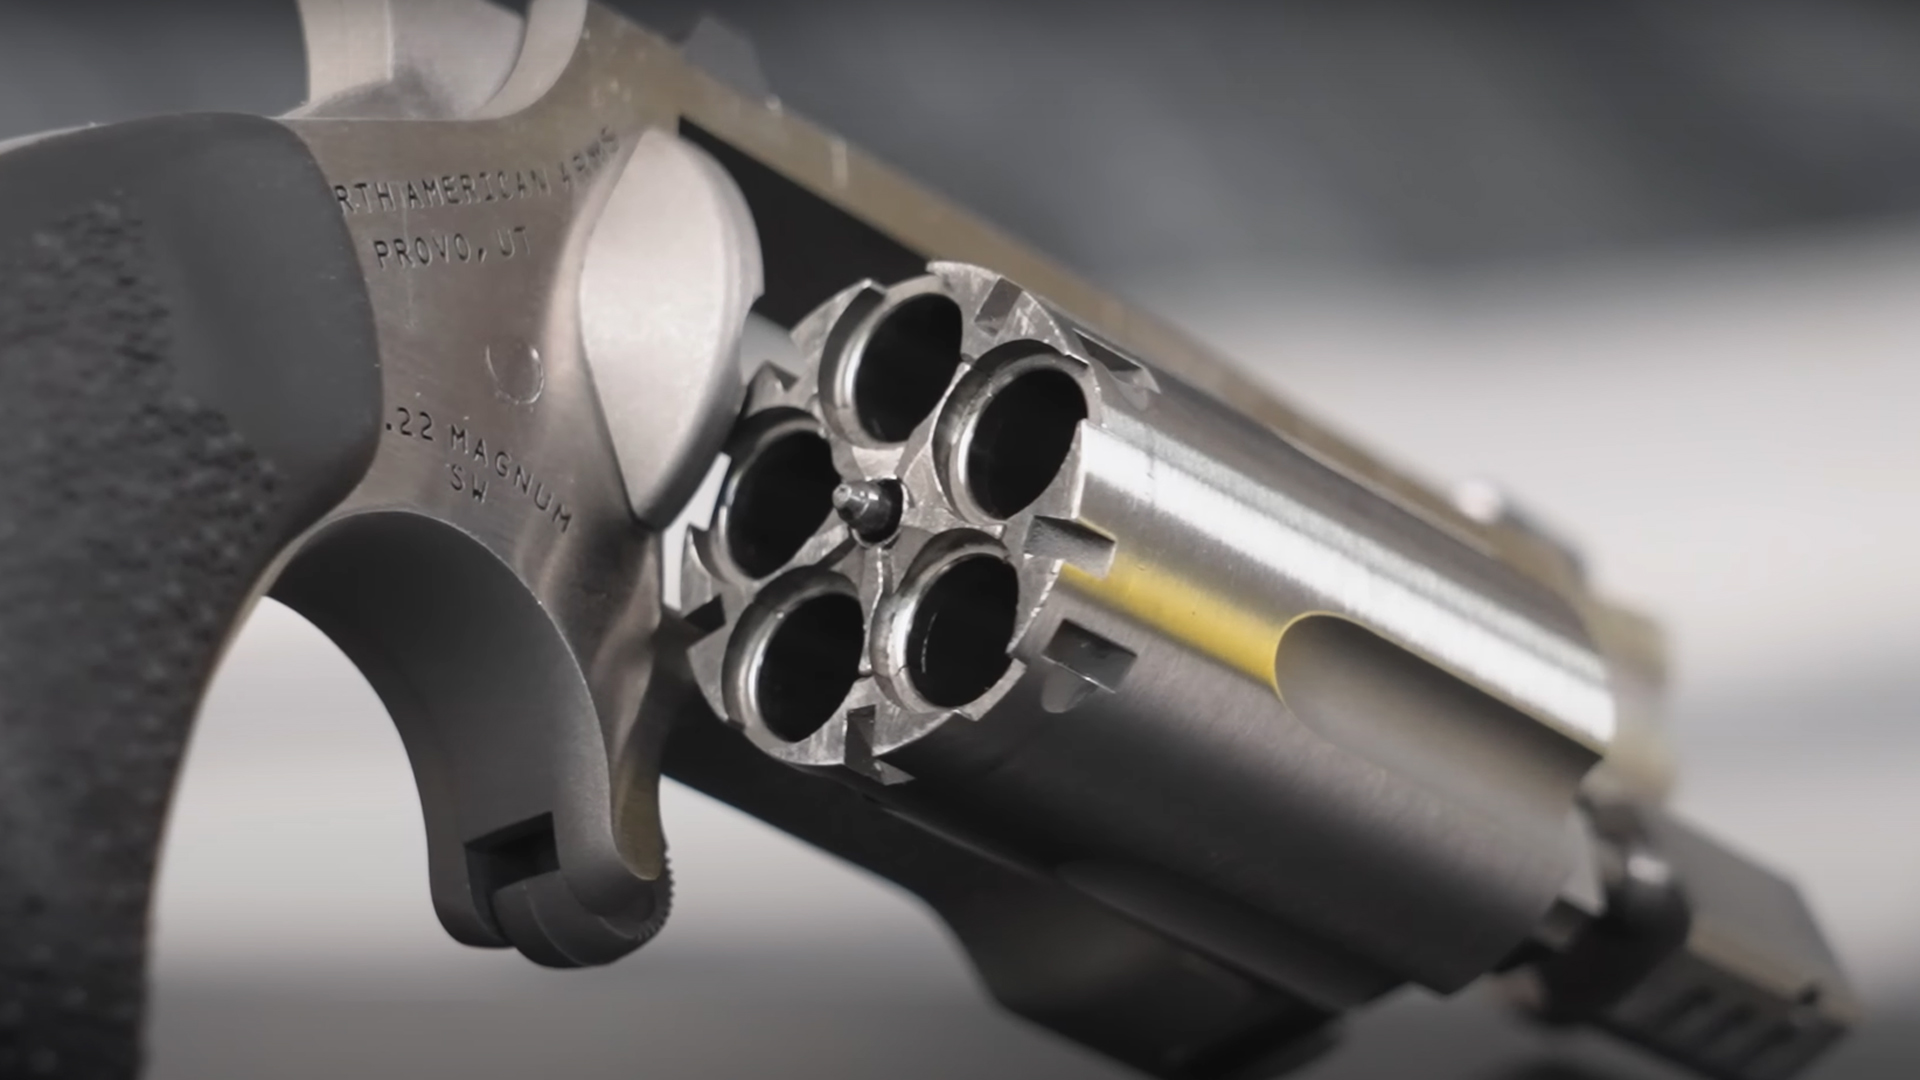 Rear view of the swing-out cylinder on the North American Arms Sentinel revolver.